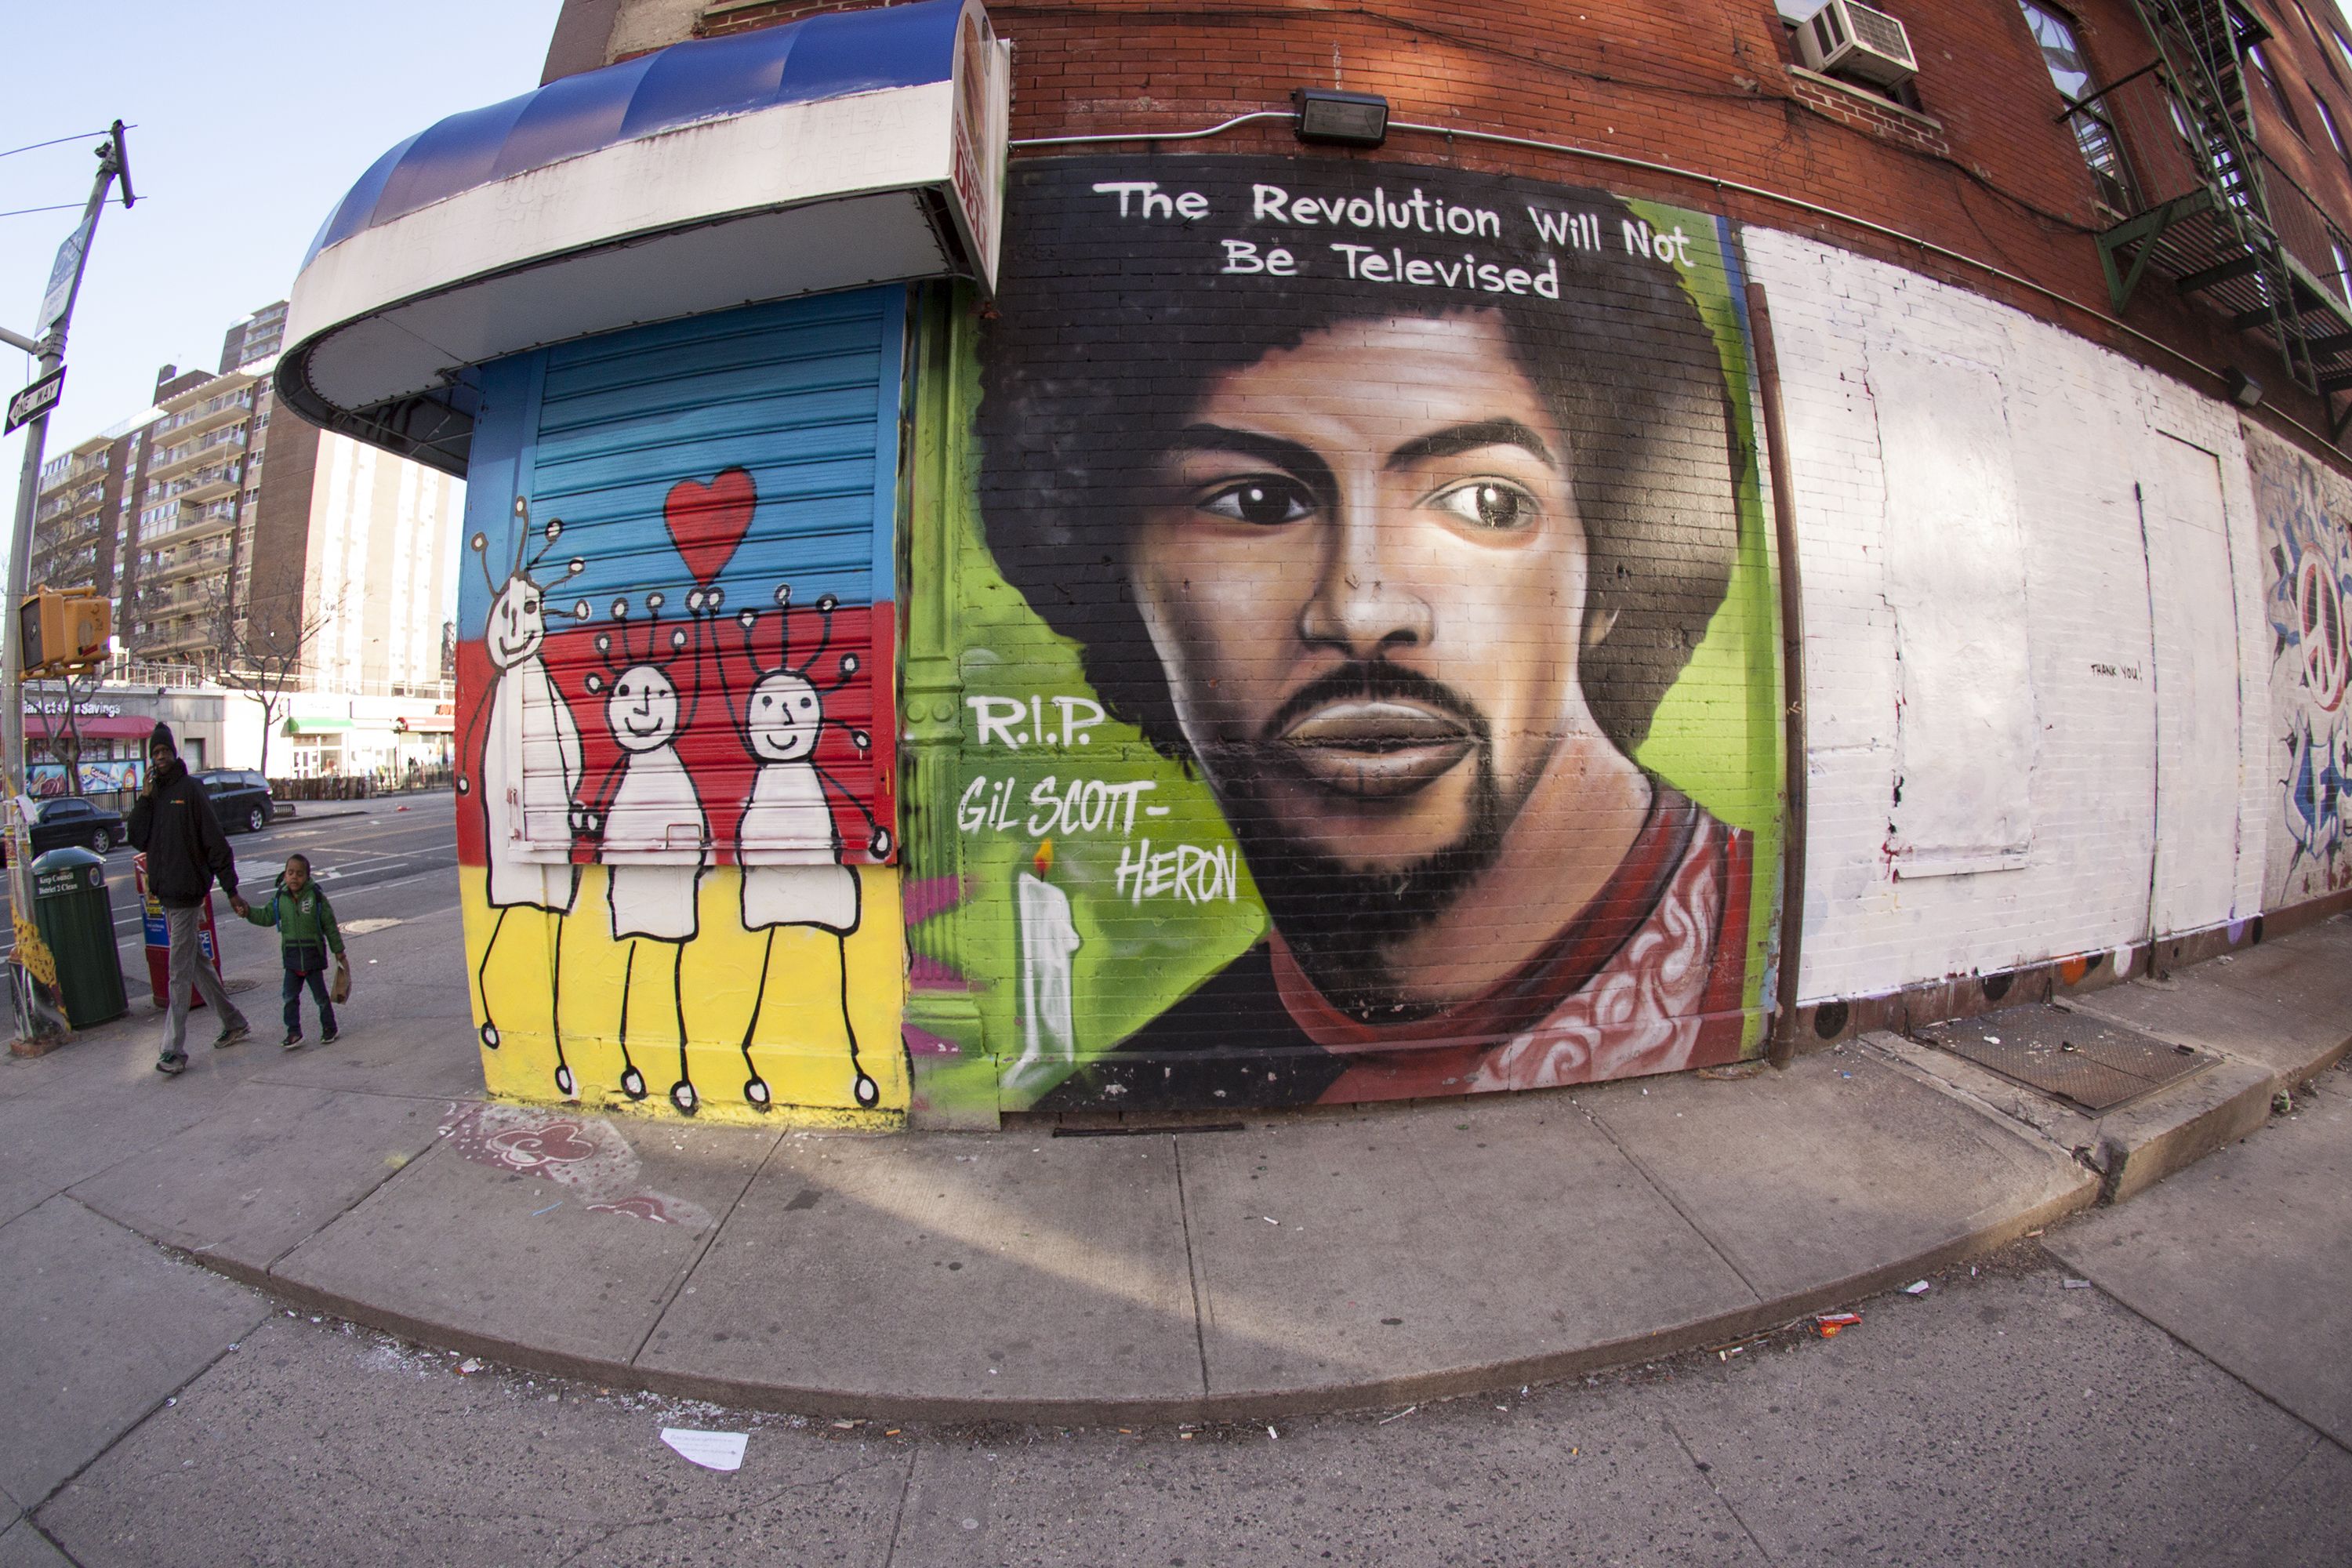  Gil Scott-Heron RIP mural photographed on East 12th street March 15, 2015 in New York City.